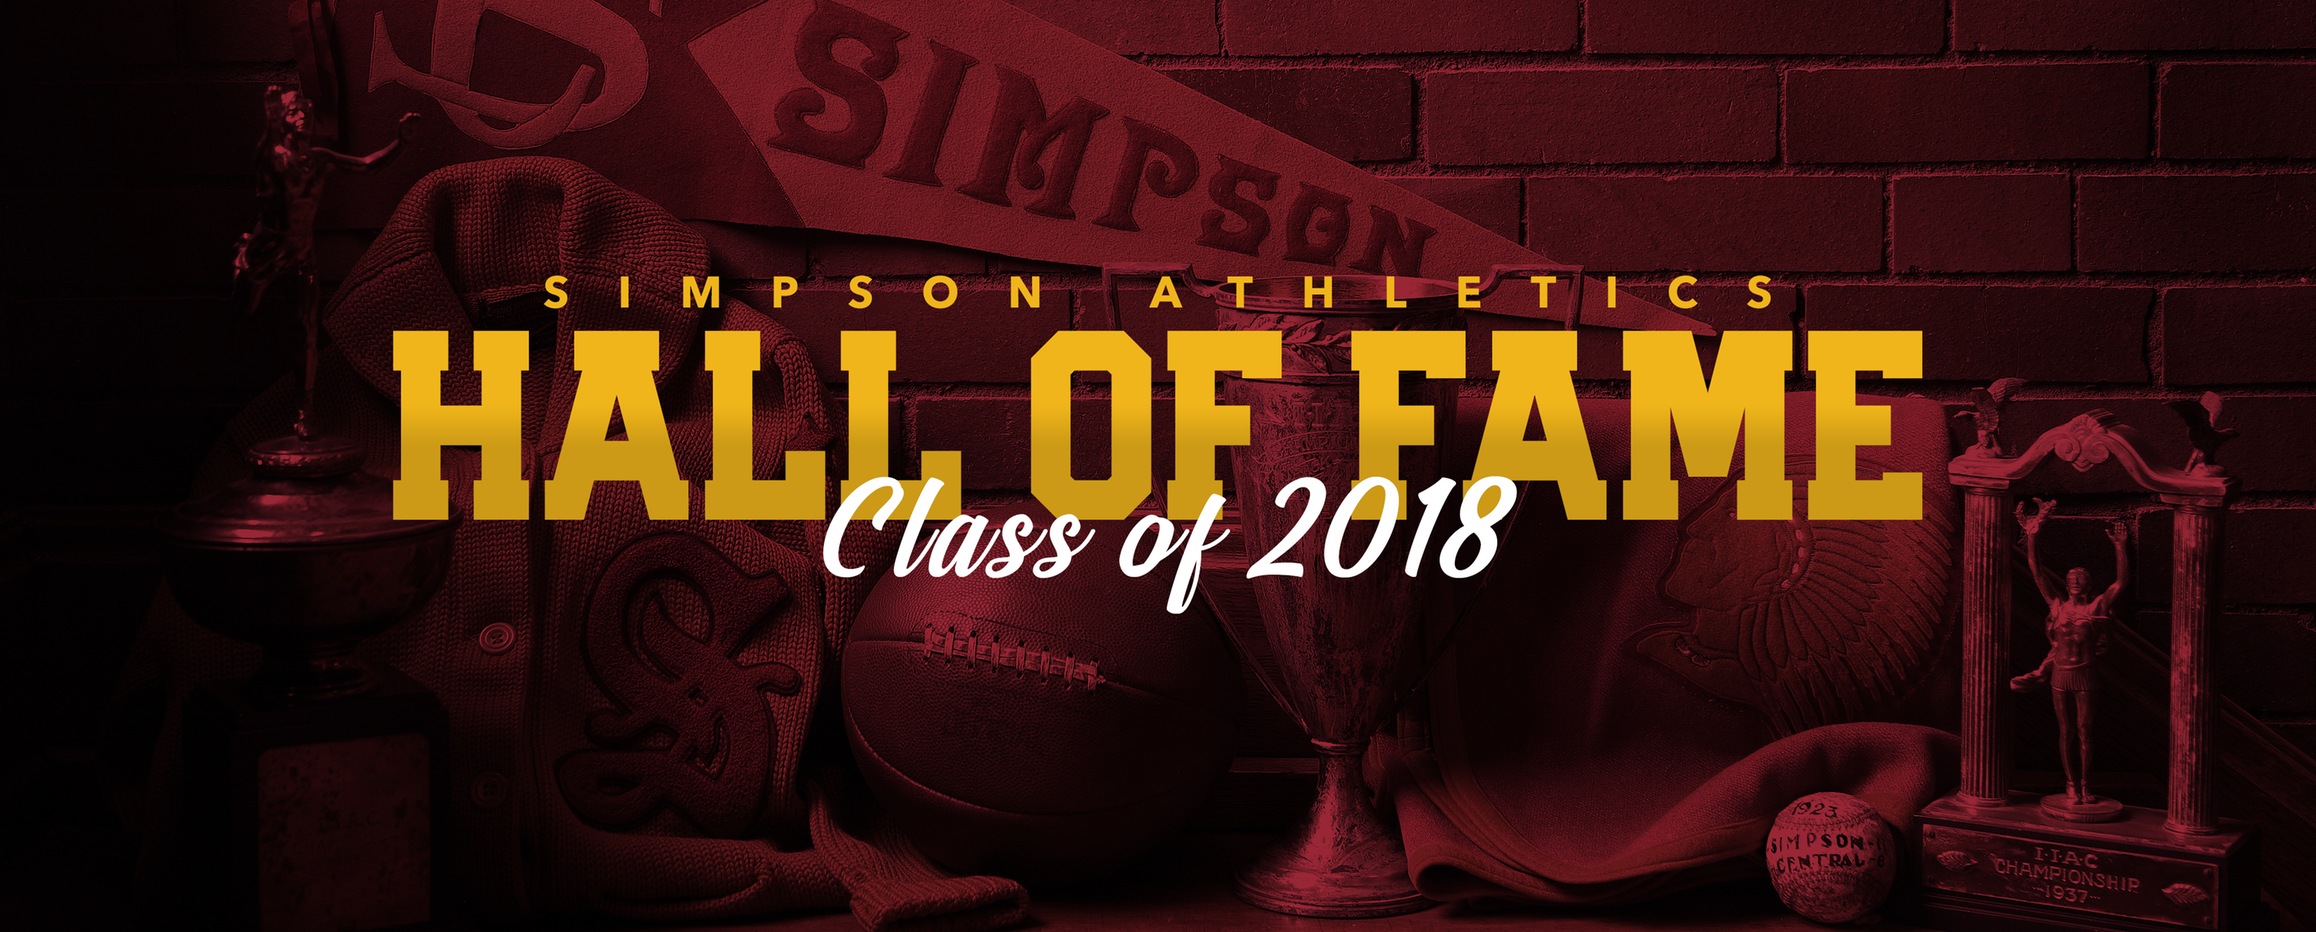 “S” Club Hall of Fame welcomes three in 2018